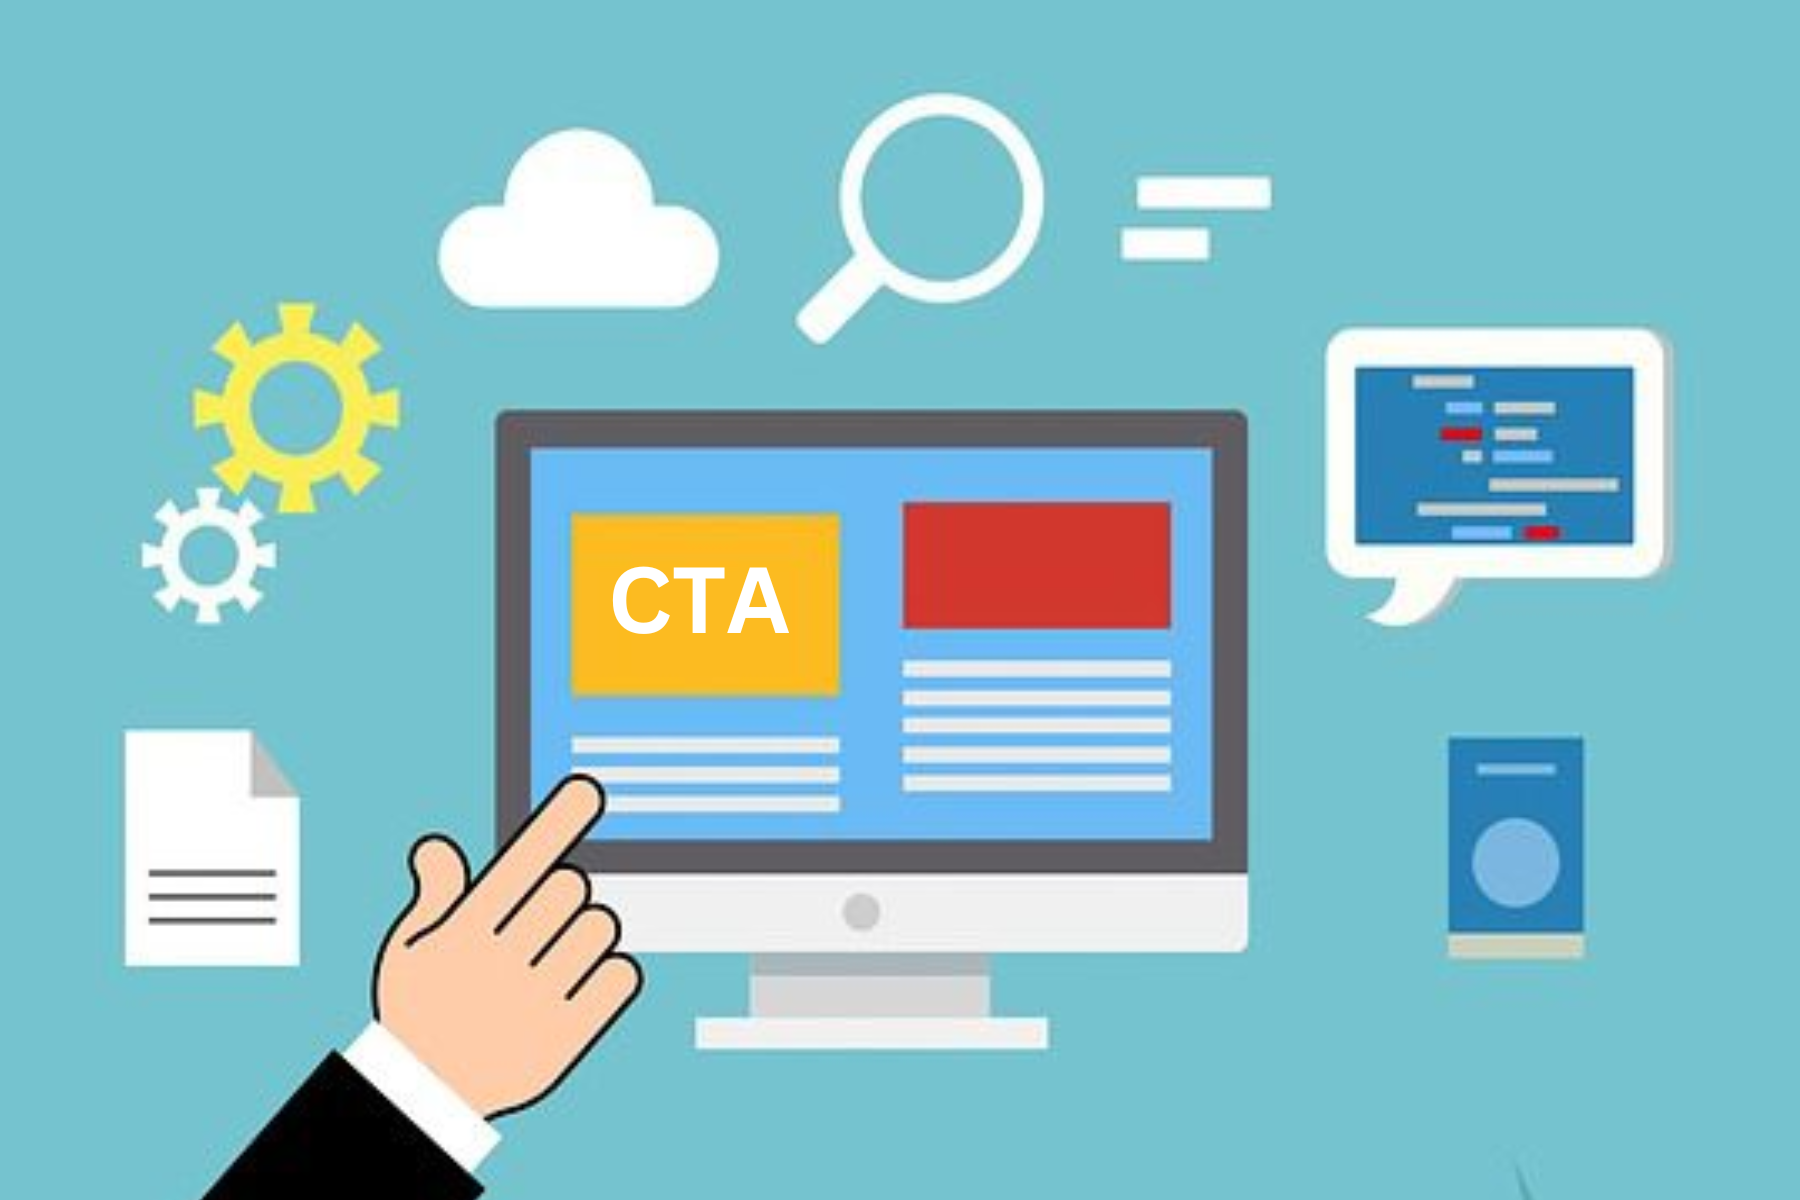 A hand of a man pointing to "CTA" on the screen